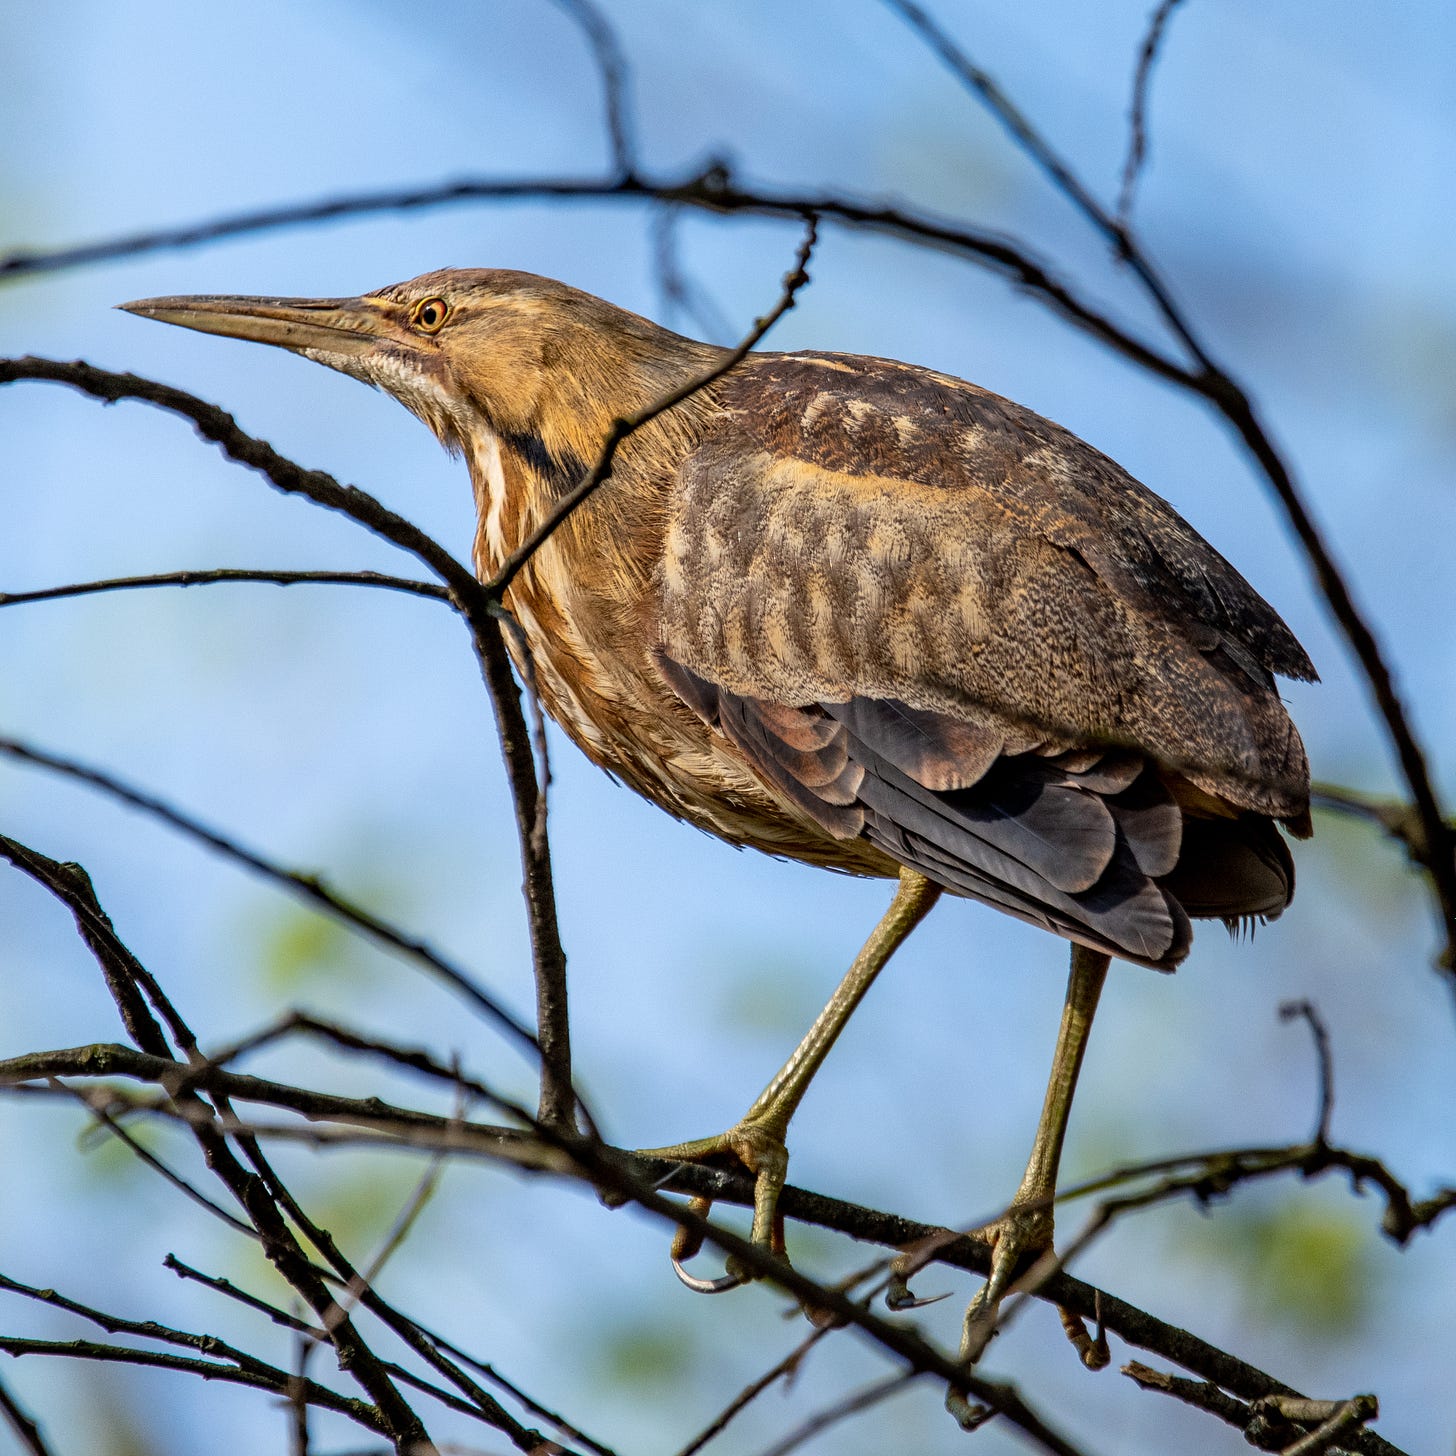 An American bittern in profile, facing left, perched in bare, thin branches that almost seem to curve around and along its fat belly and long, thin beak